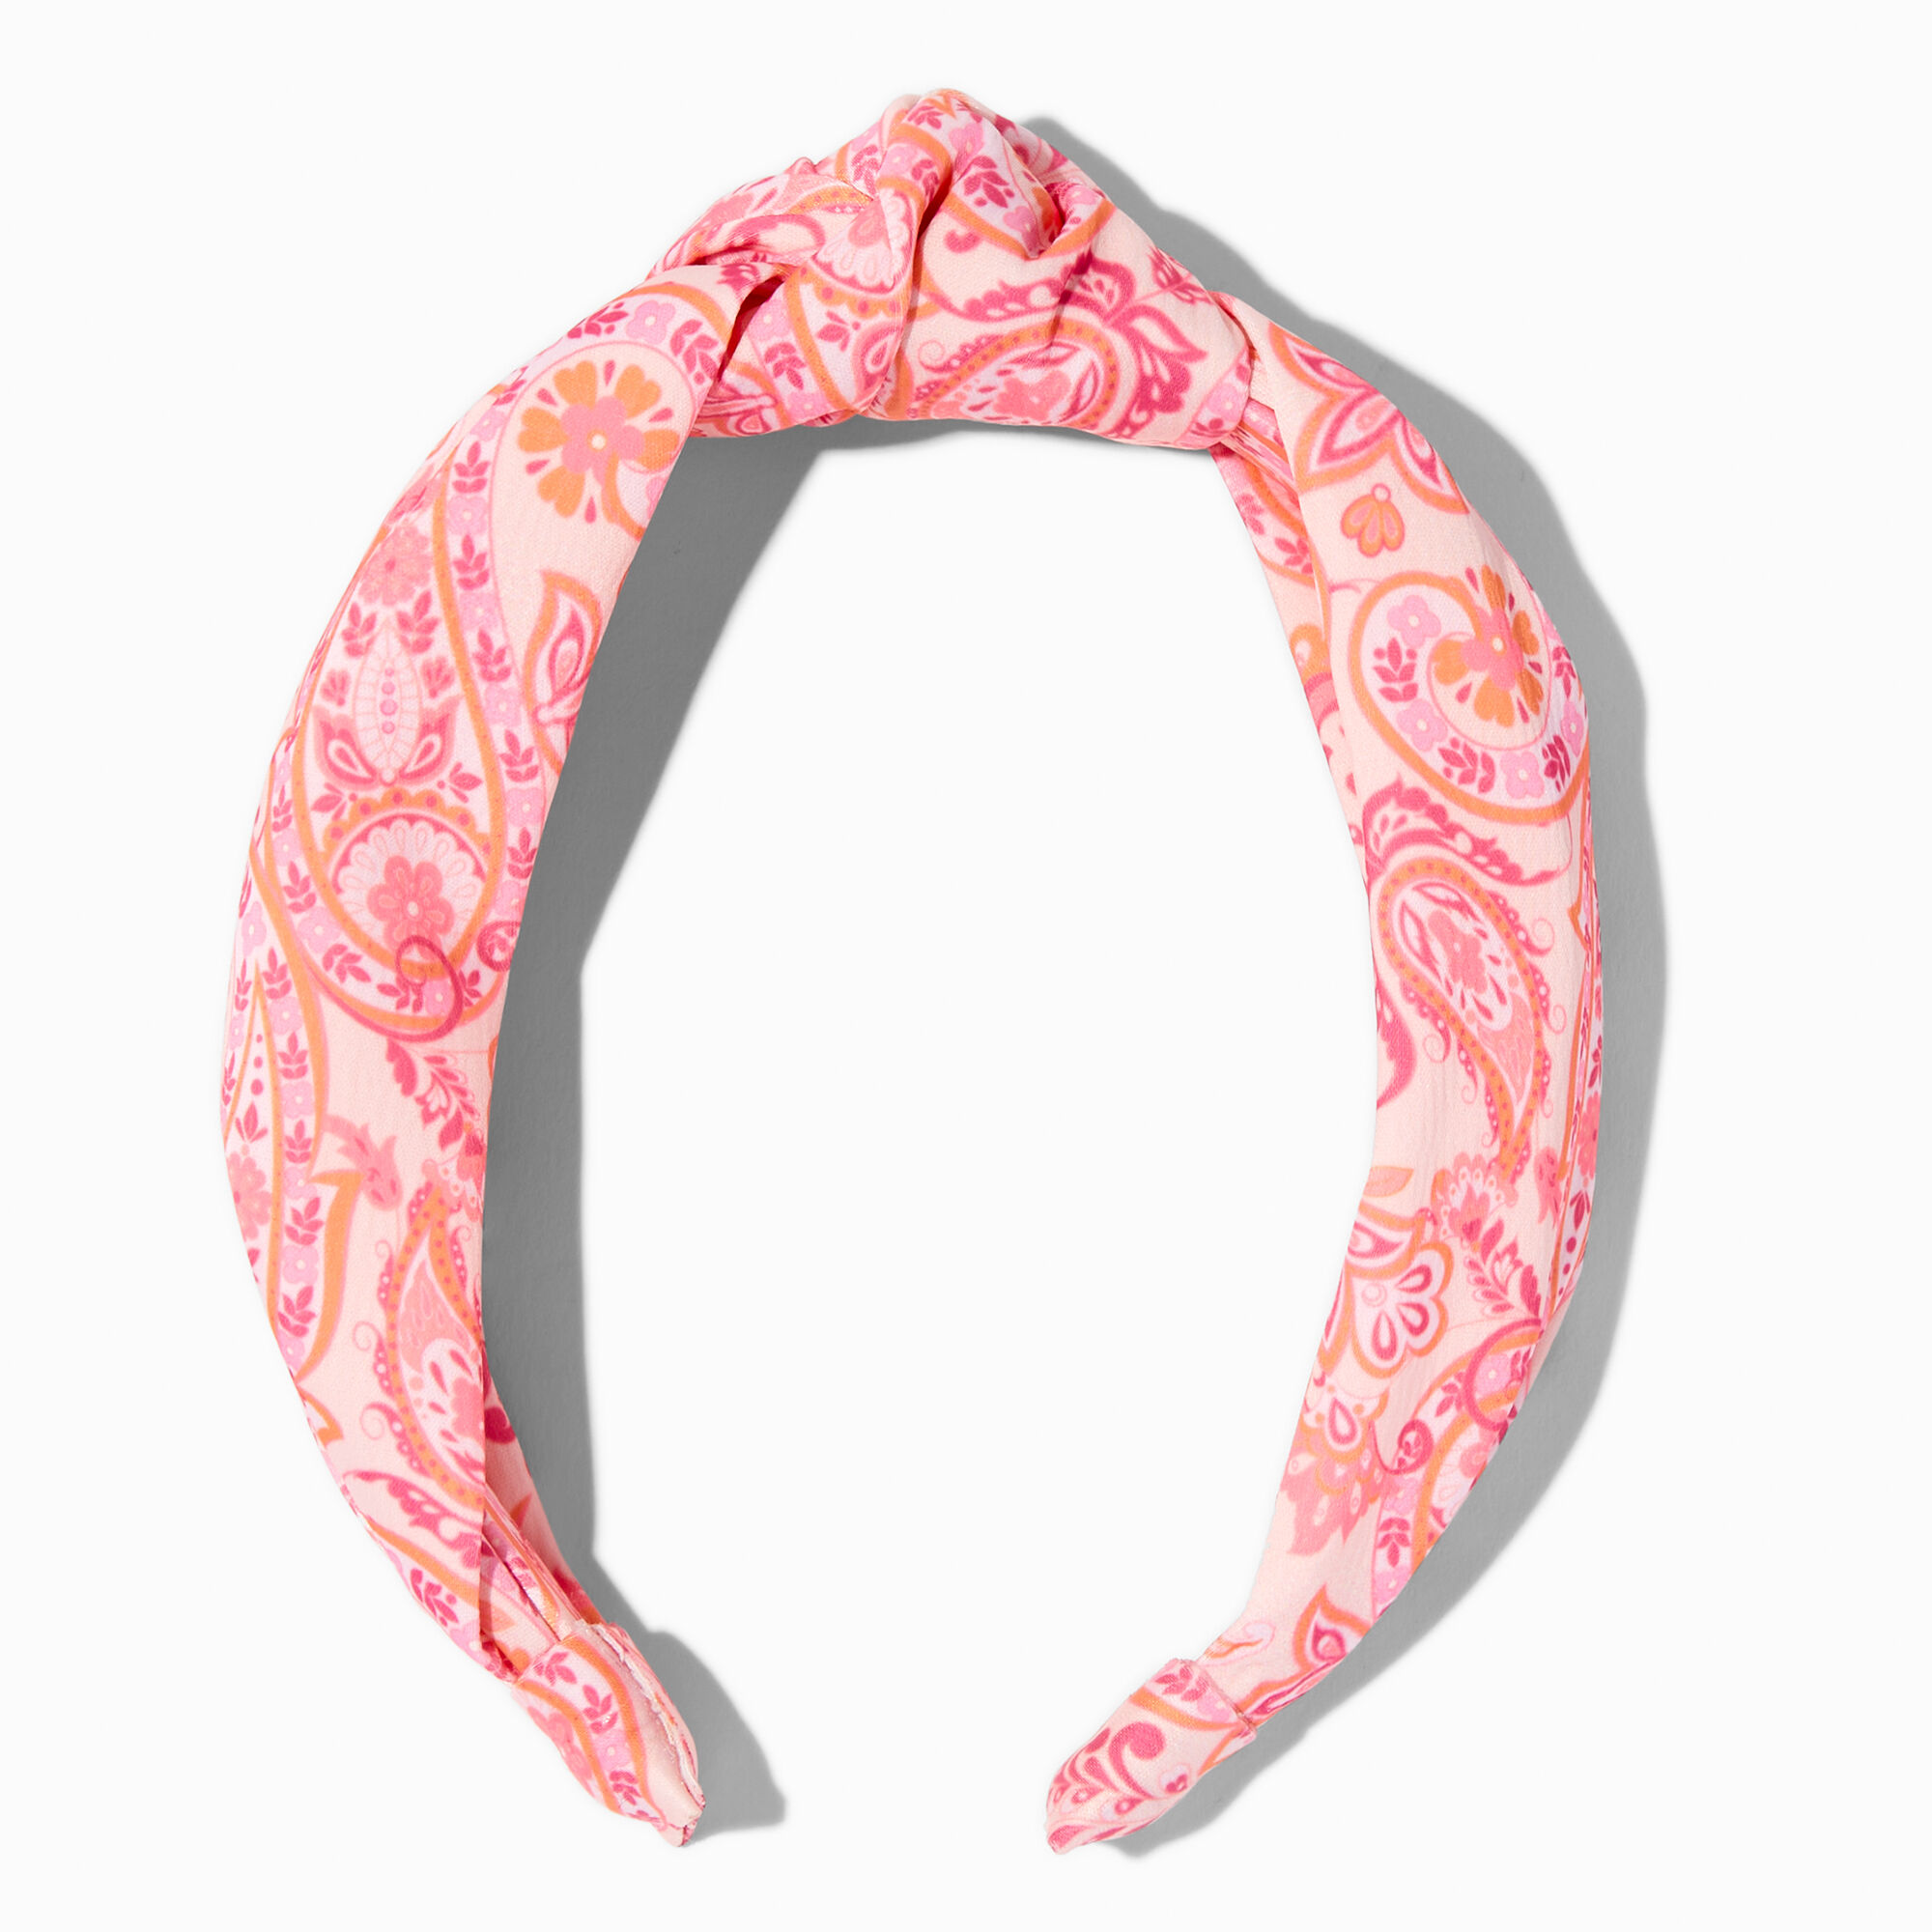 View Claires Paisley Knotted Headband Pink information